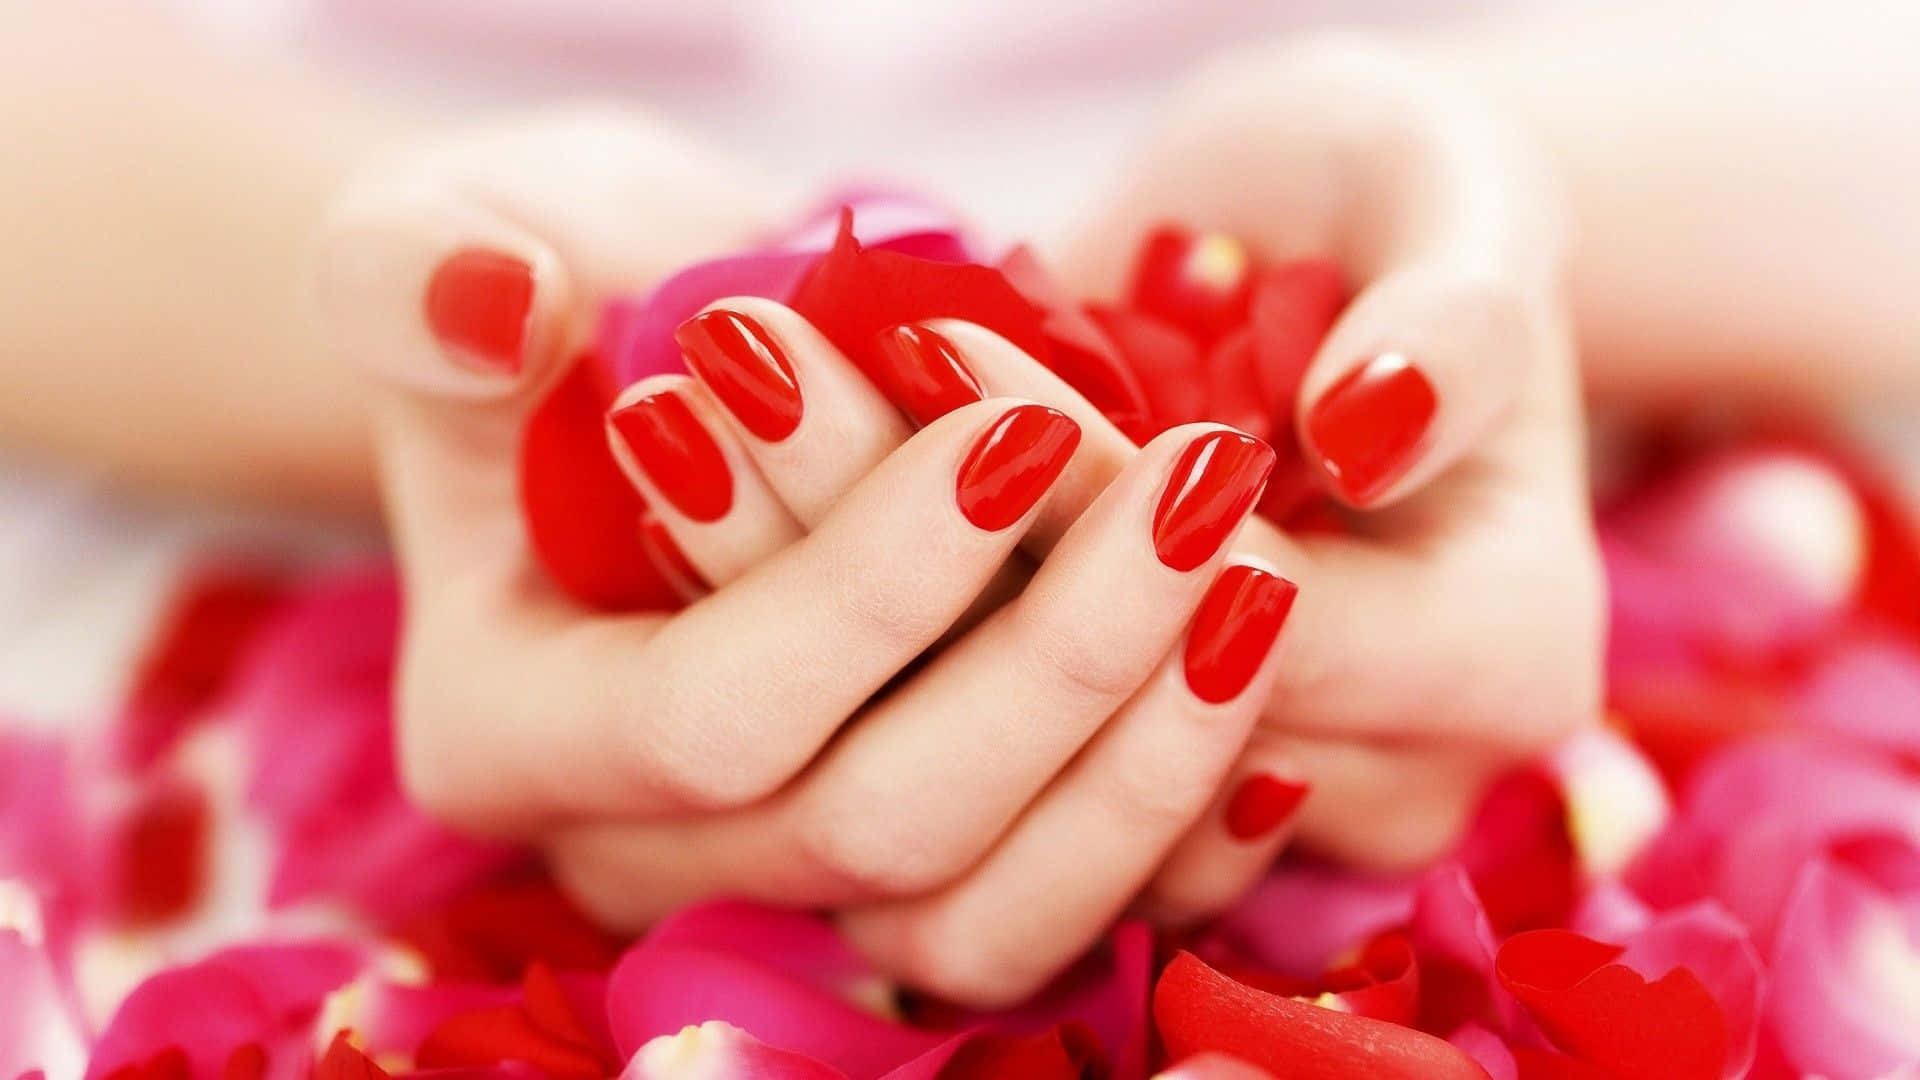 Girl's Hands With Red Nail Art And Petals Picture